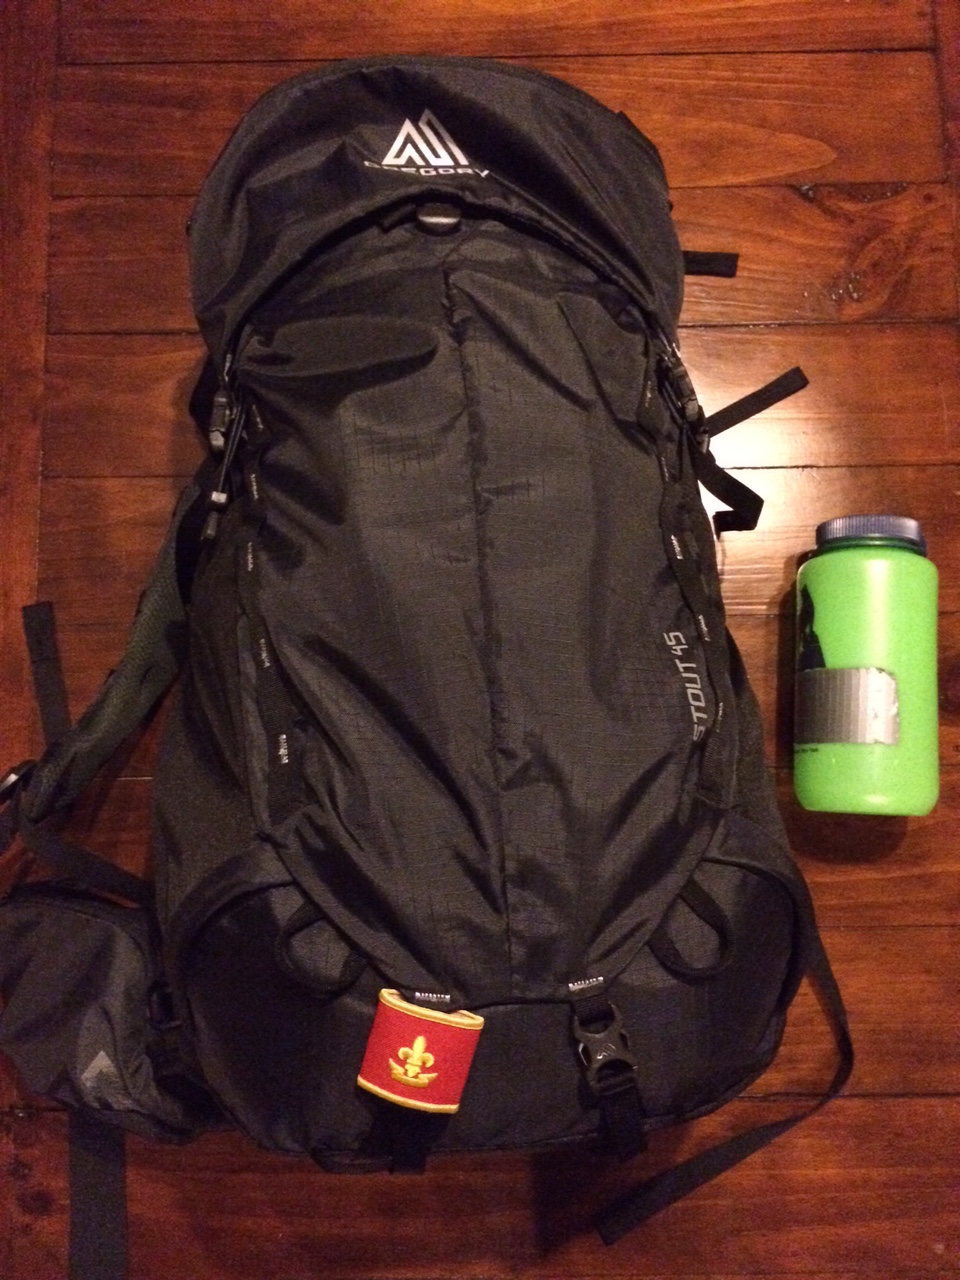 A well packed bag with individual and contingent gear can fit into a 45L pack.